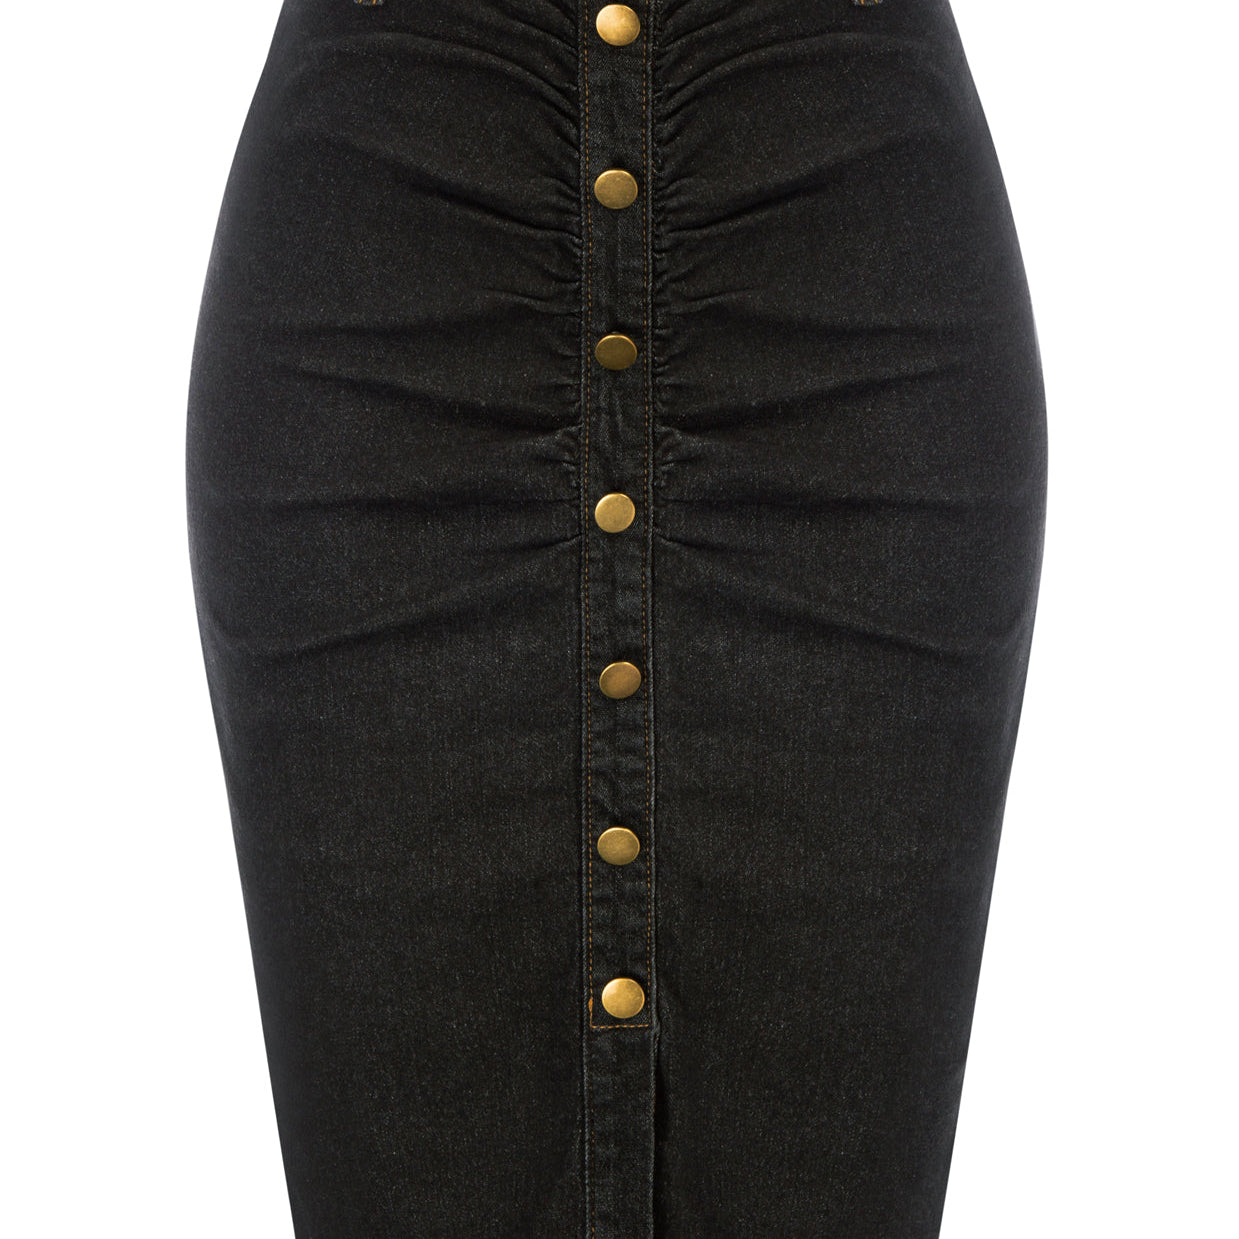 Influencer Vintage Jean Skirt with Belt High Waist Ruched Front Bodycon Skirt